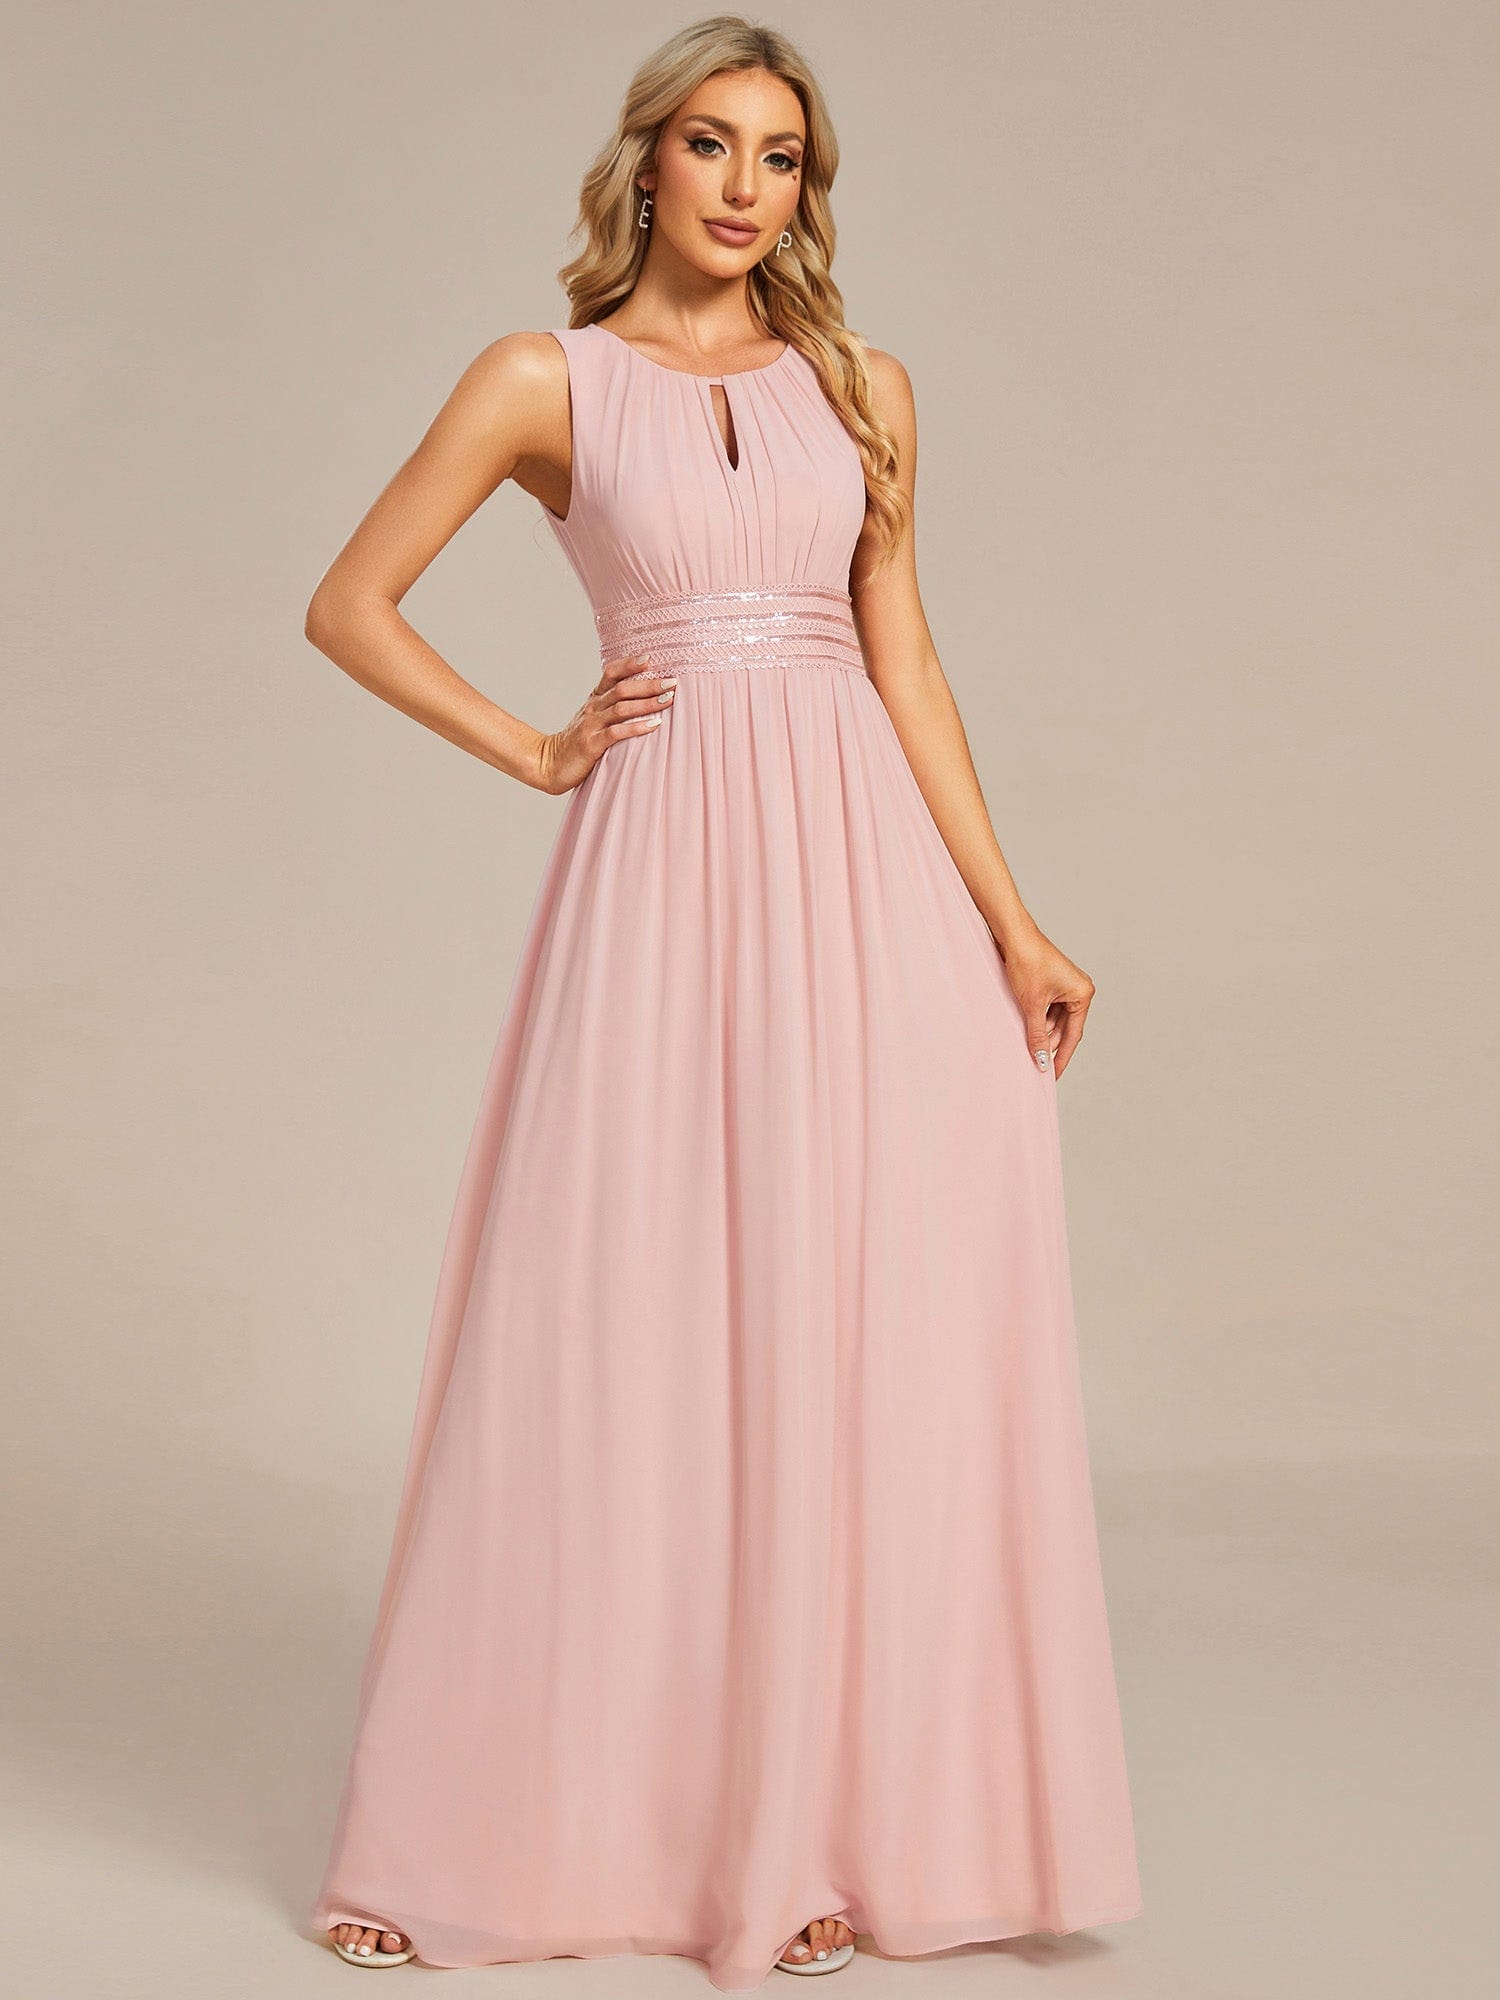 Custom Size Simple Sleeveless A-line Chiffon Bridesmaid Dress with Hollow Out Detail